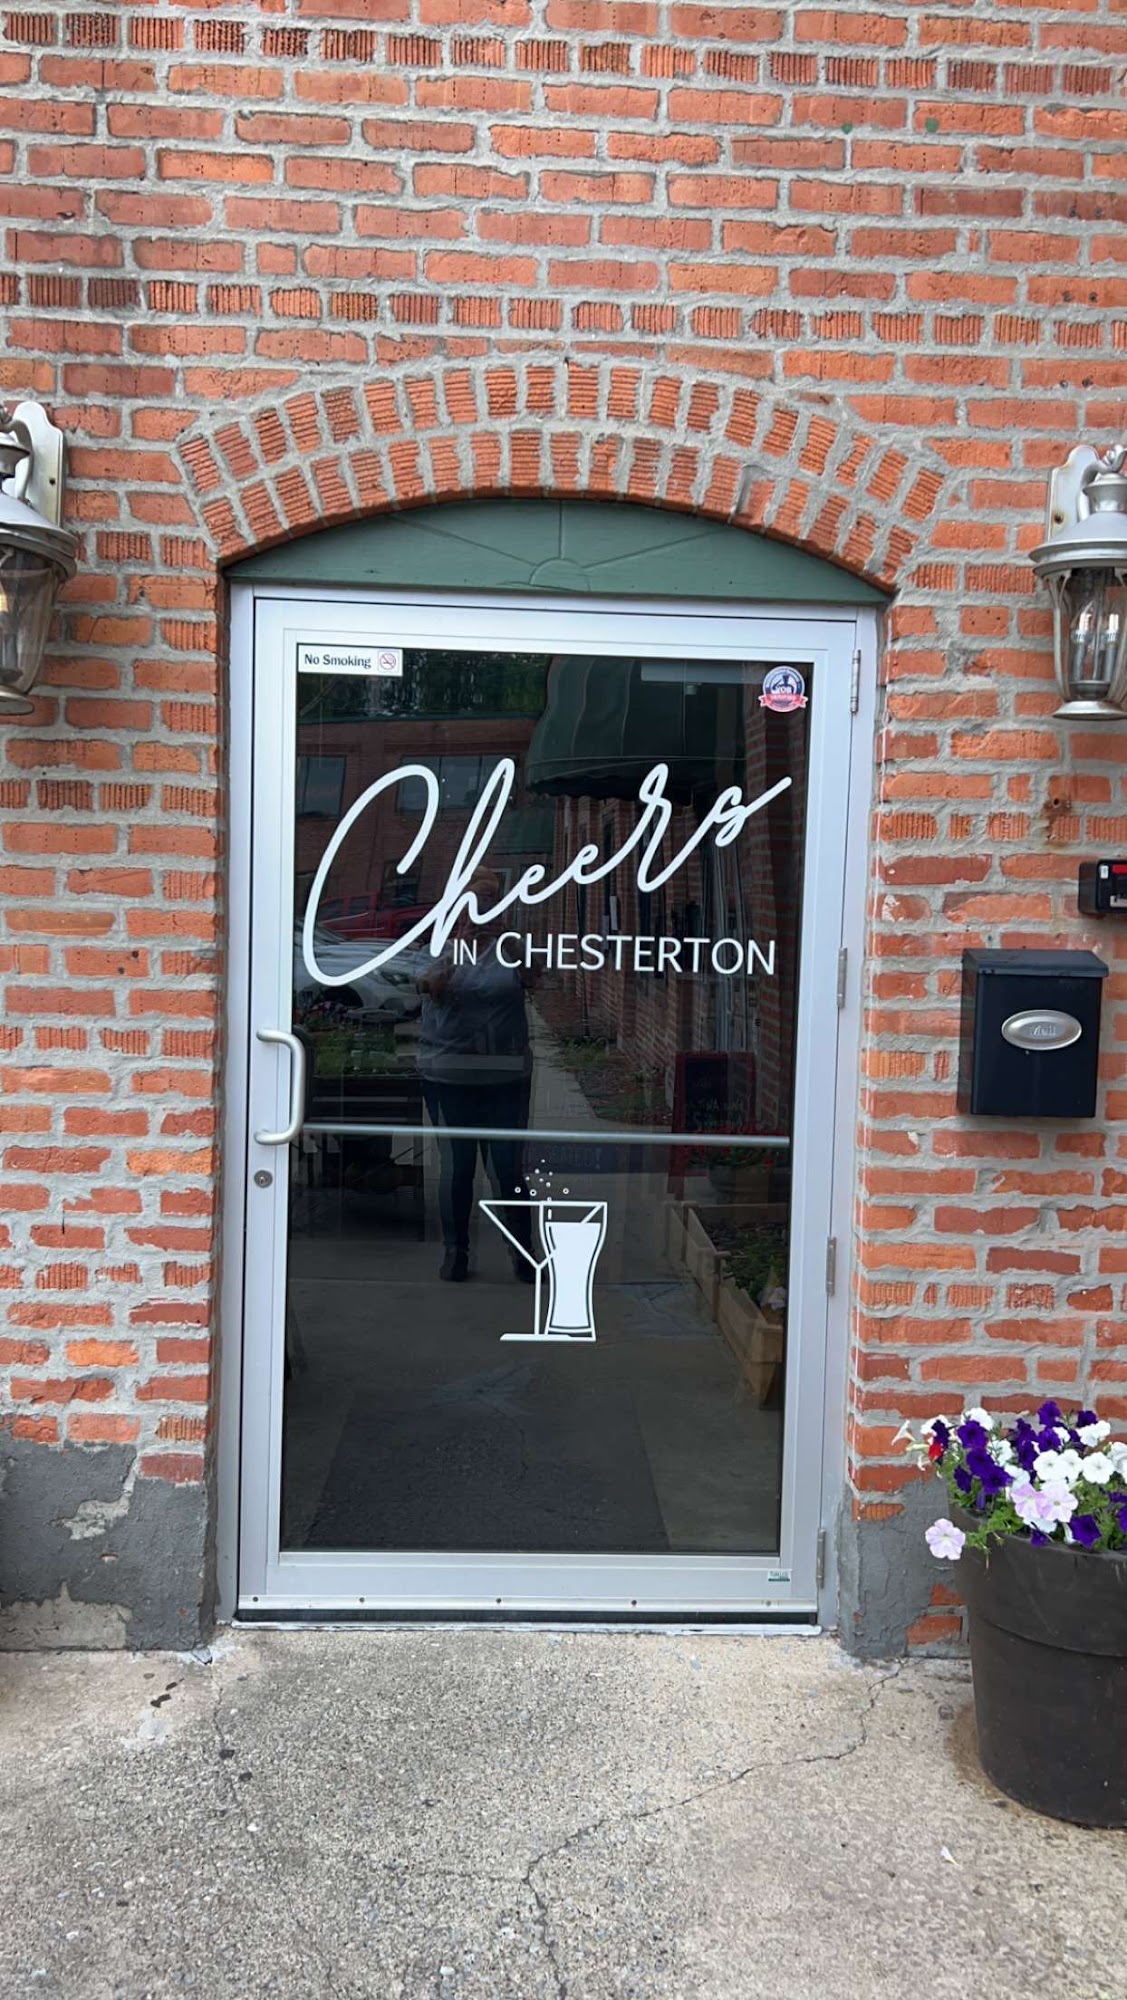 Cheers! In Chesterton